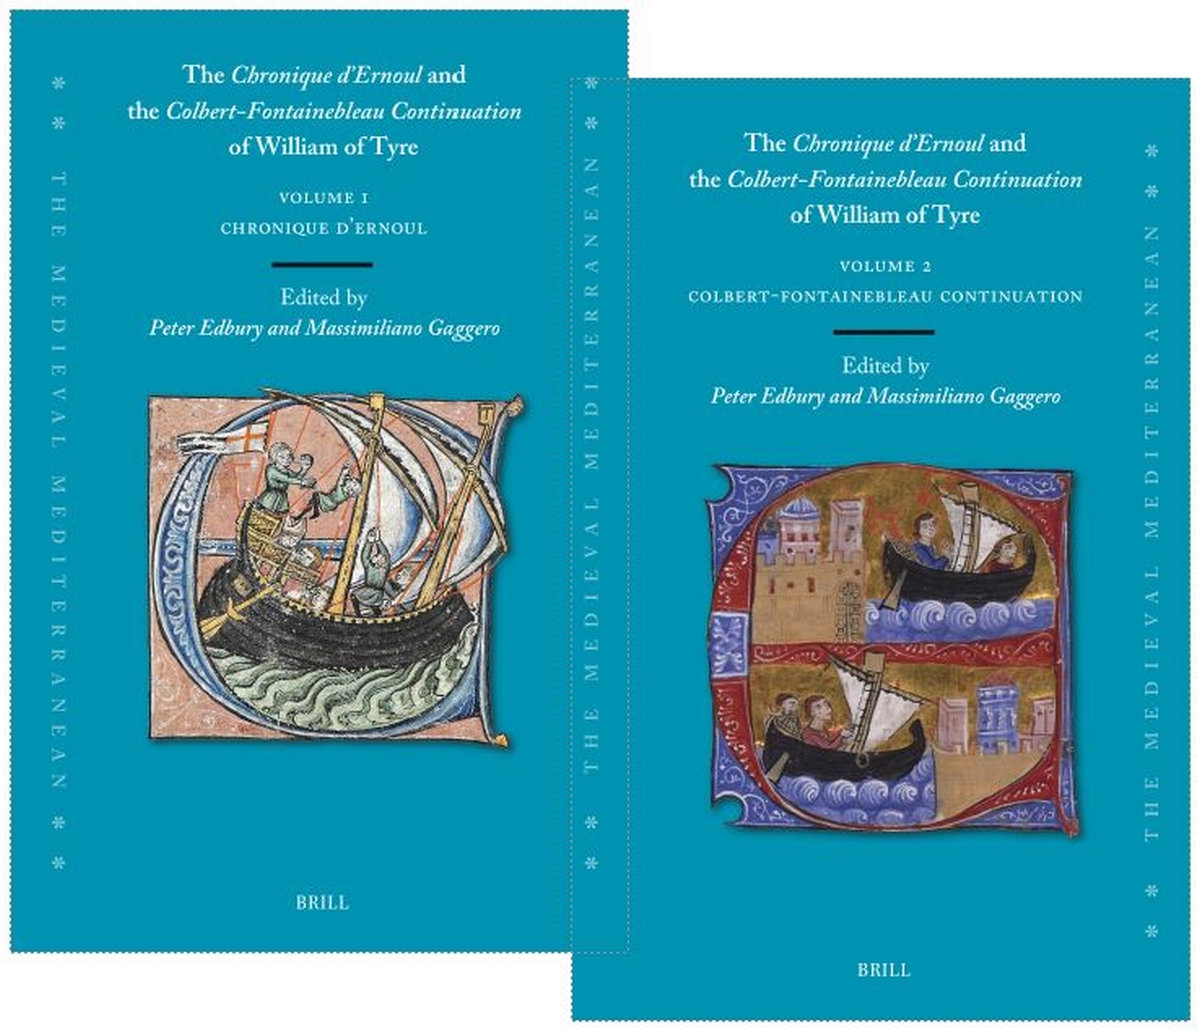 The Chronique d’Ernoul and the Colbert-Fontainebleau Continuation of William of Tyre, 2 vols. eds. Peter Edbury and Massimiliano Gaggero (@Brill_History , July 2023)
facebook.com/MedievalUpdate…
brill.com/display/packag…
#medievaltwitter #medievalstudies #medievalhistoriography